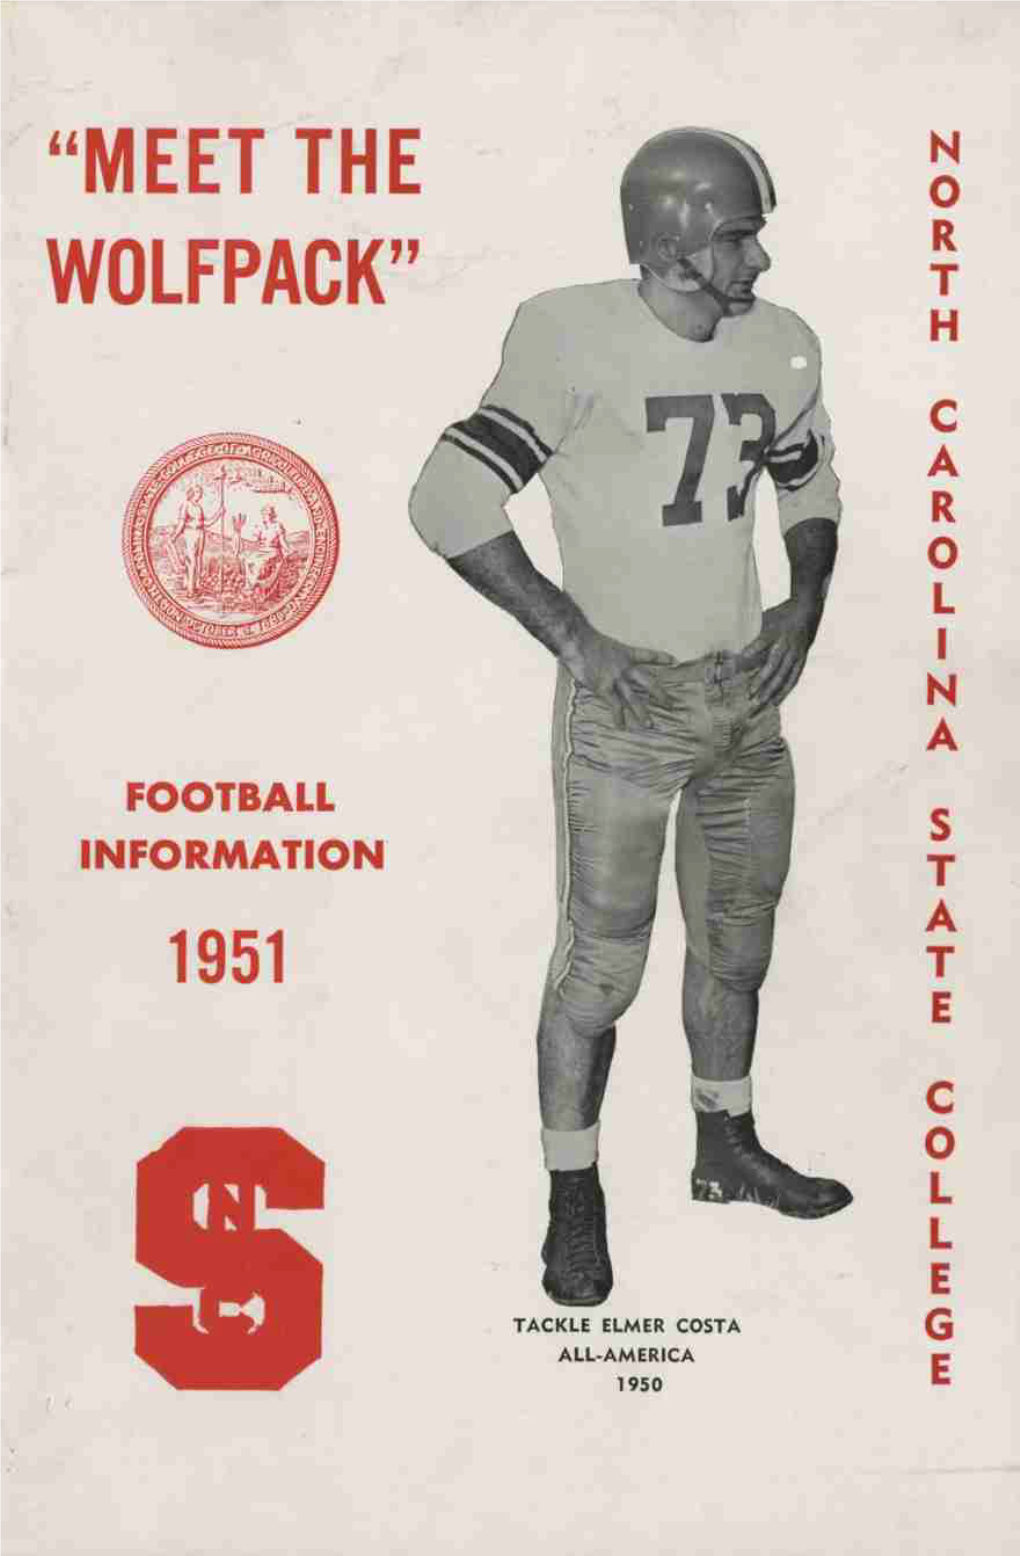 “Meet the Wolfpack” 1951 All-America 1950 Tackle